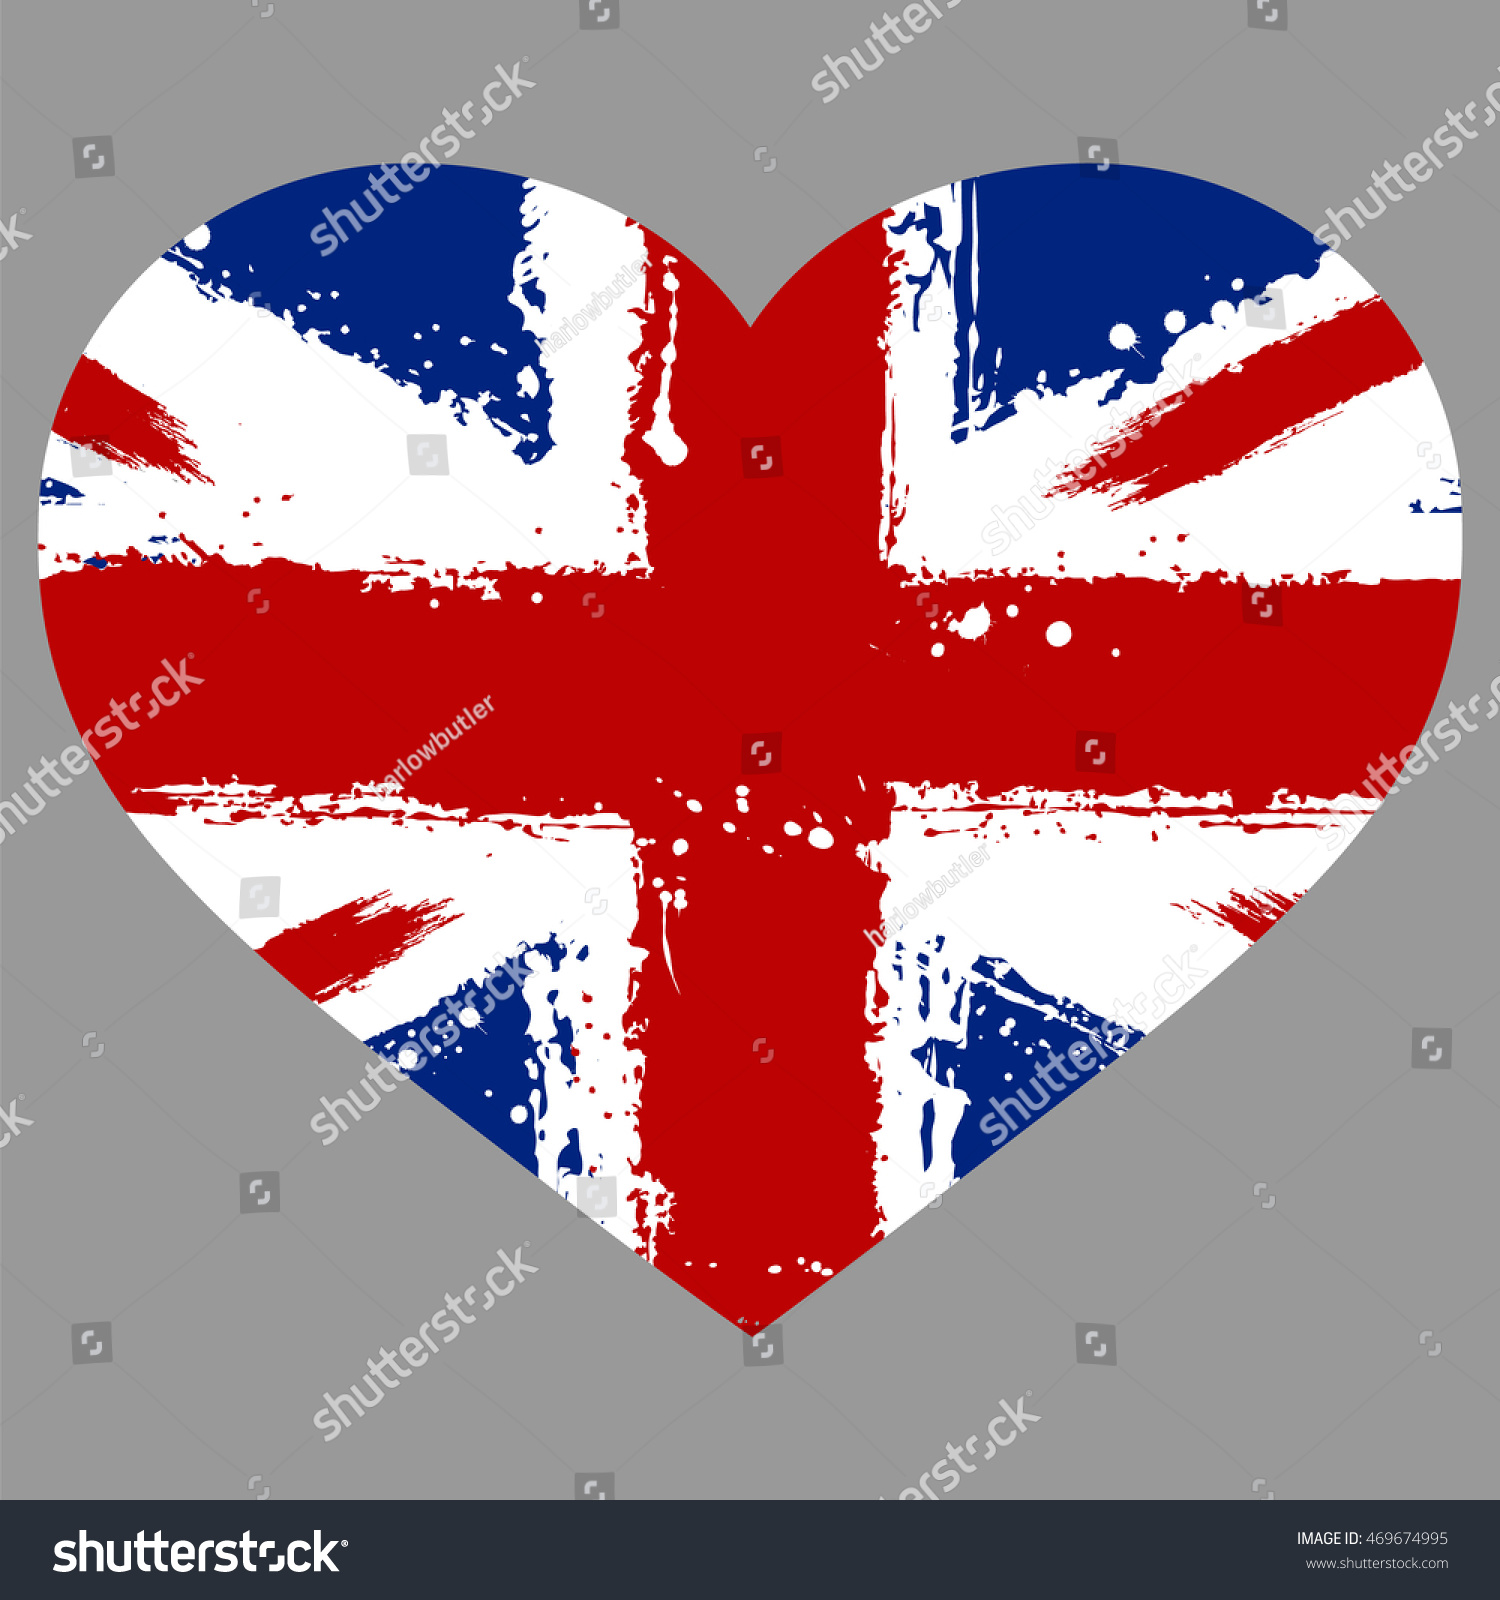 SVG of Illustration of a grungy heart with the Union Jack
 svg